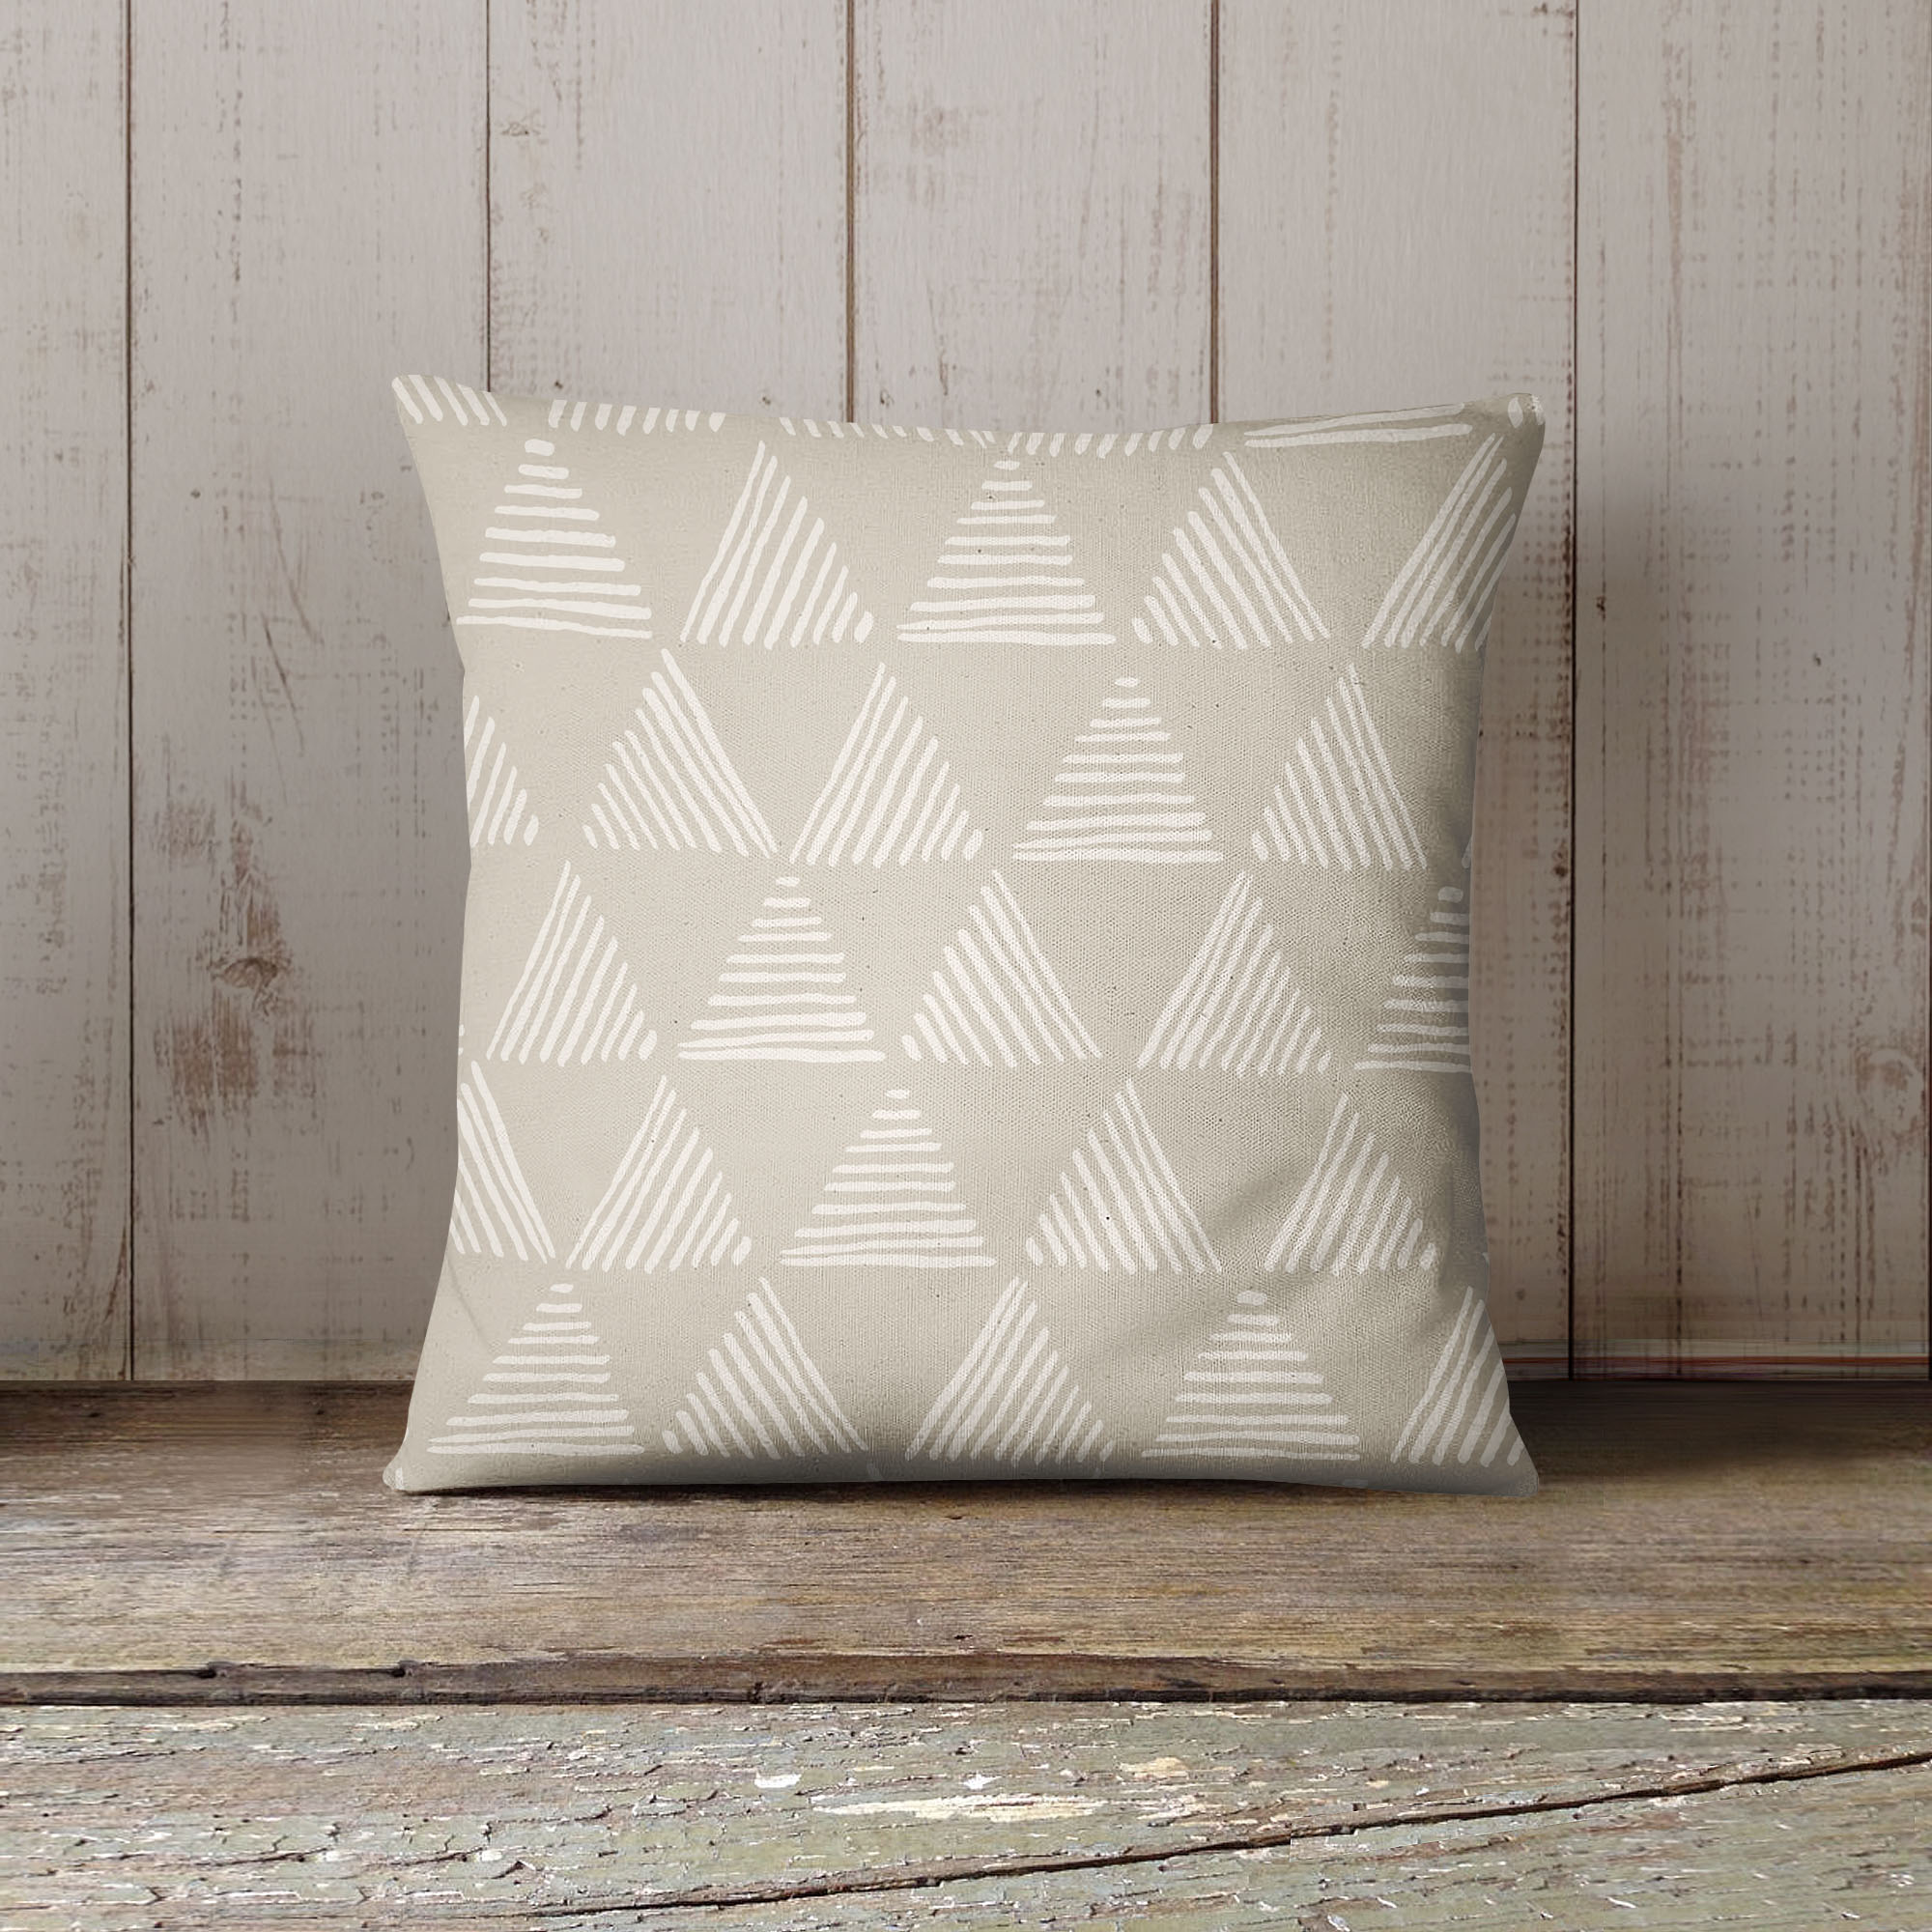 Triangular Prism Beige Outdoor Pillow by Kavka Designs - image 2 of 5